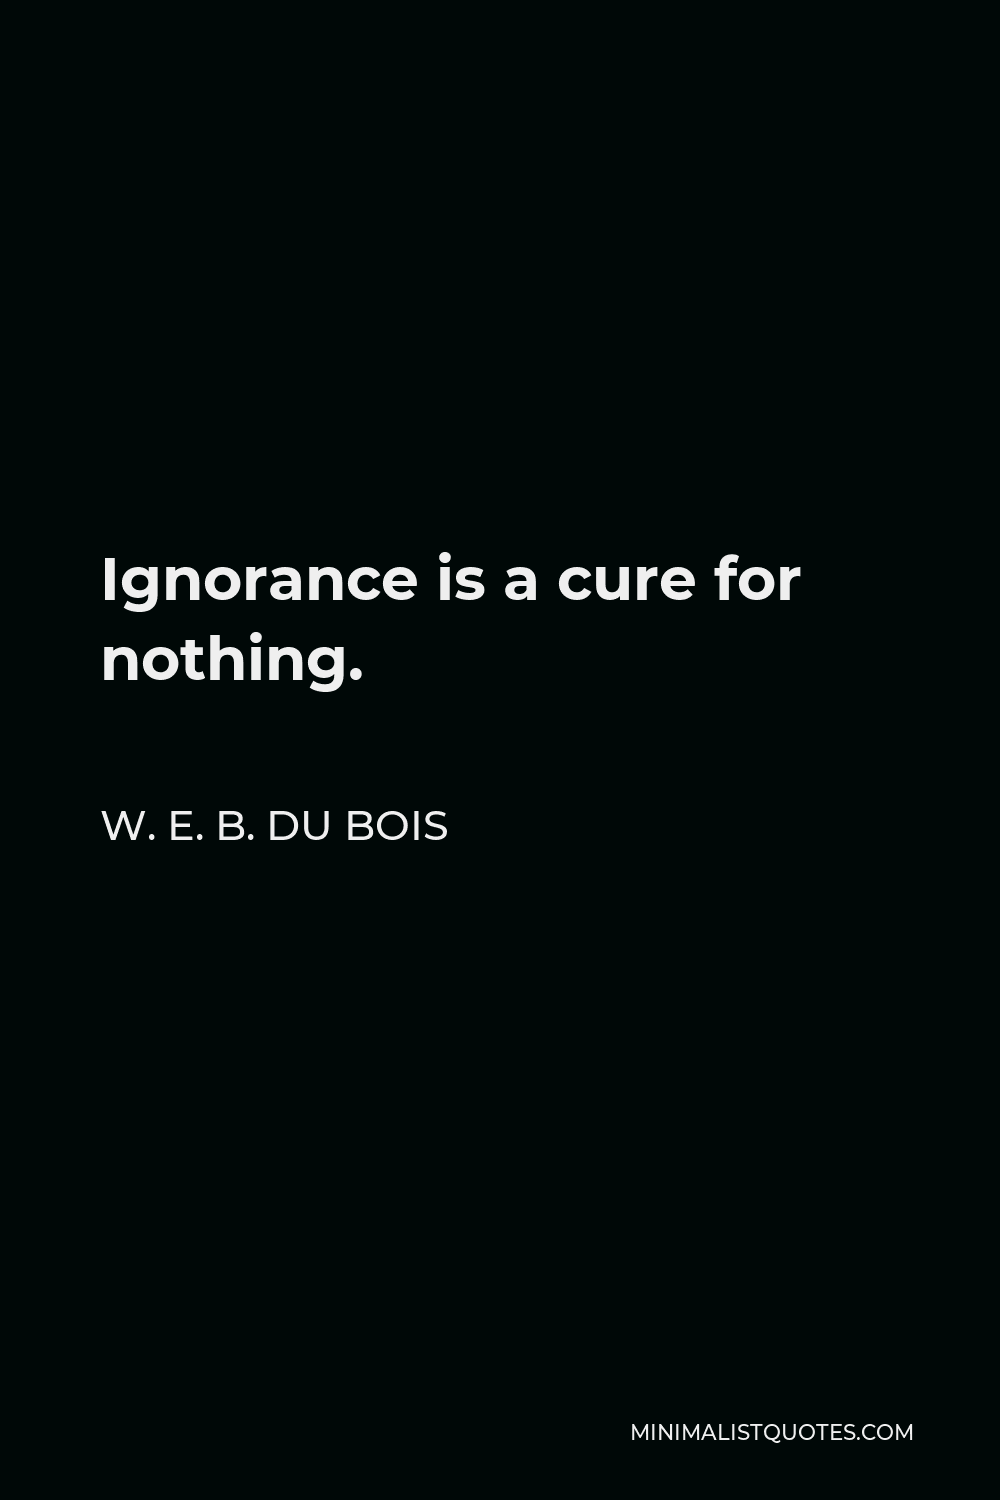 W. E. B. Du Bois Quote - Ignorance is a cure for nothing.